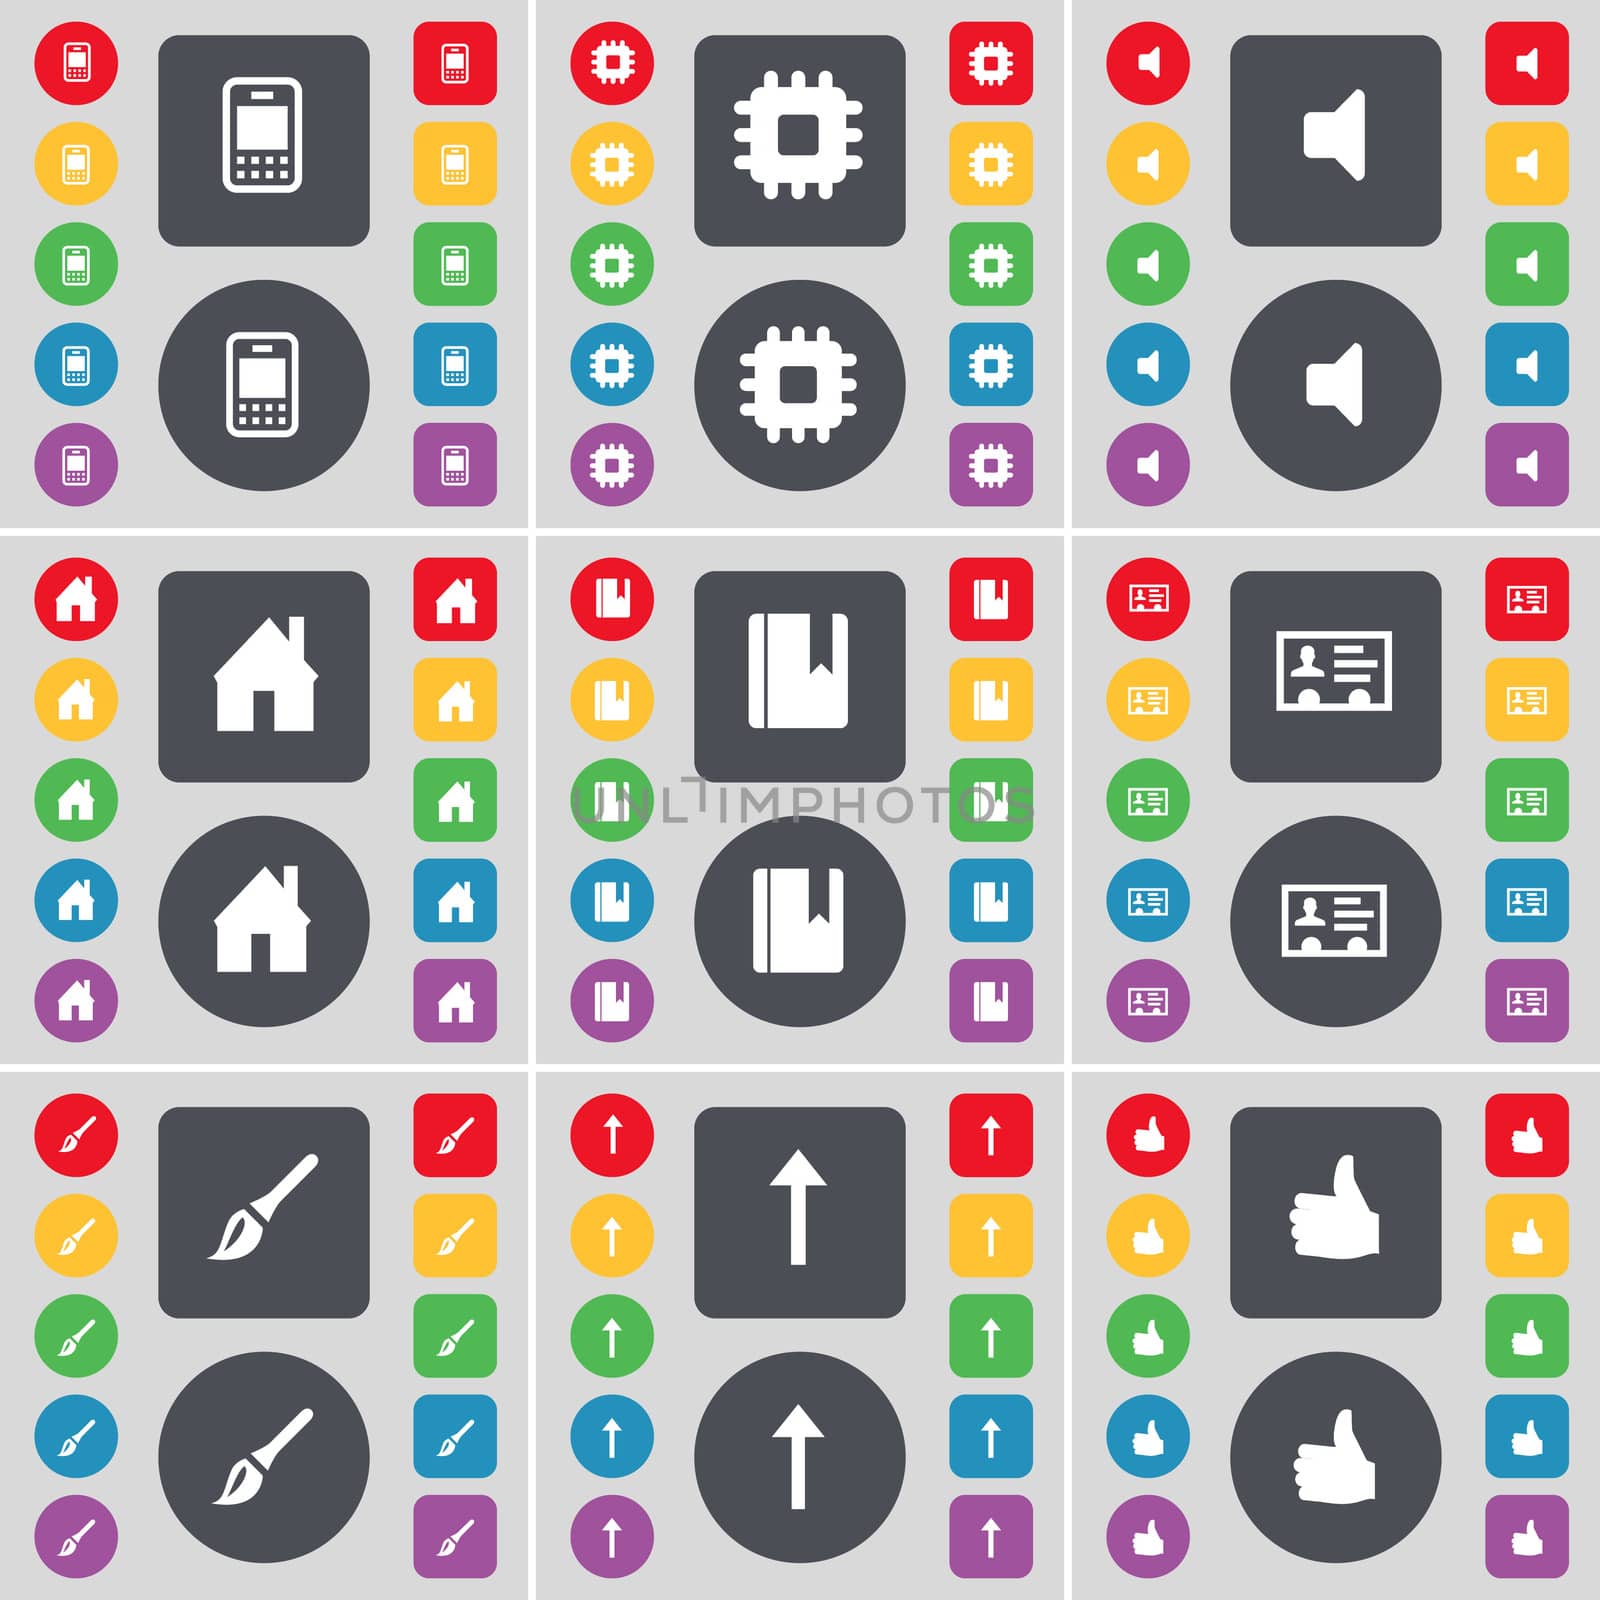 Mobile phone, Processor, Sound, House, Dictionary, Contact, Brush, Arrow up, Like icon symbol. A large set of flat, colored buttons for your design.  by serhii_lohvyniuk